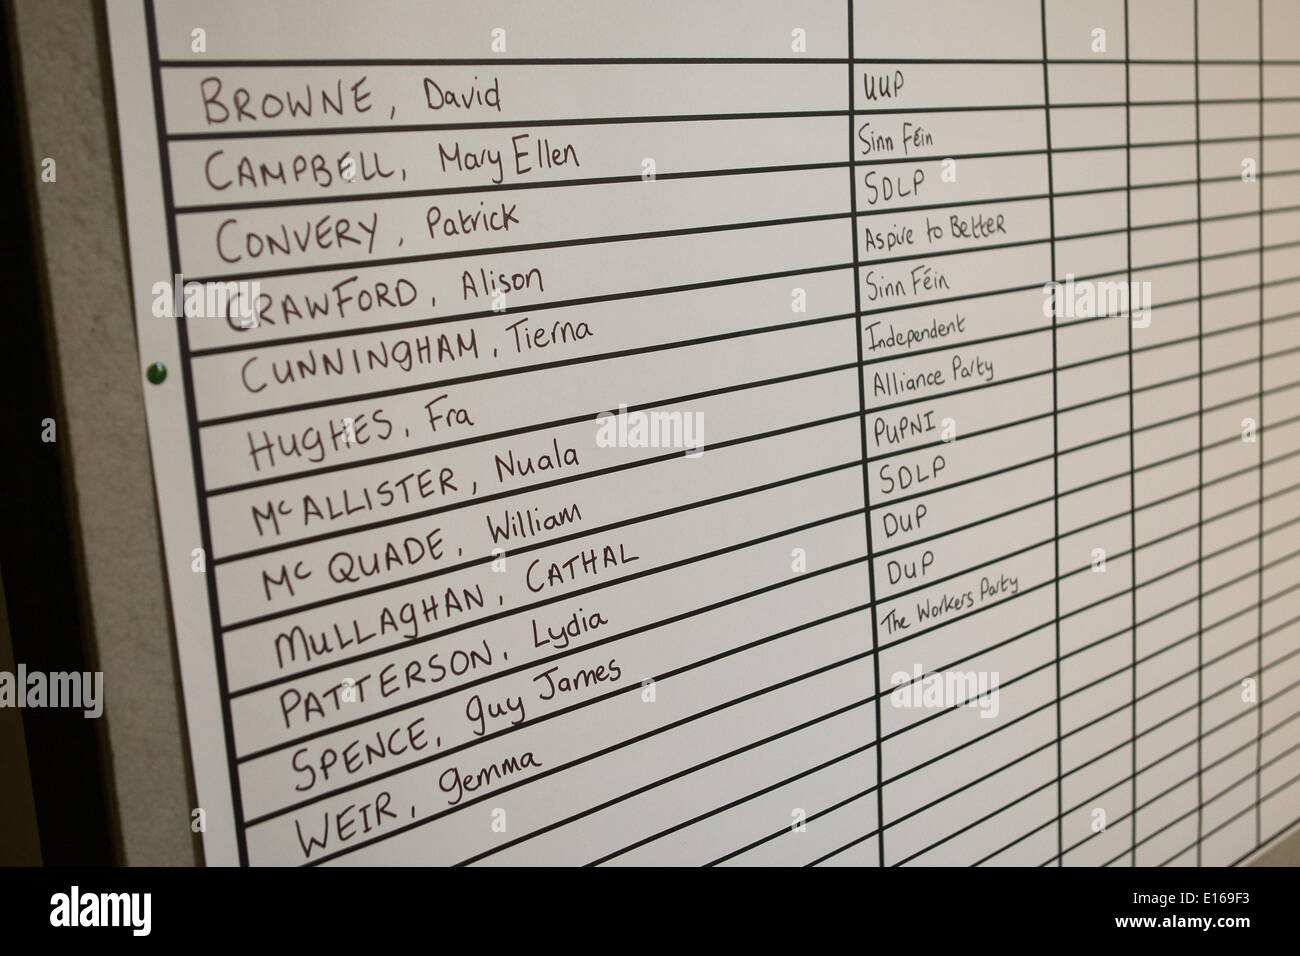 Belfast,UK 23rd may 2014. Close up of Castle Ward Blank Election Result Sheet in Belfast City Hall Credit:  Bonzo/Alamy Live News Stock Photo